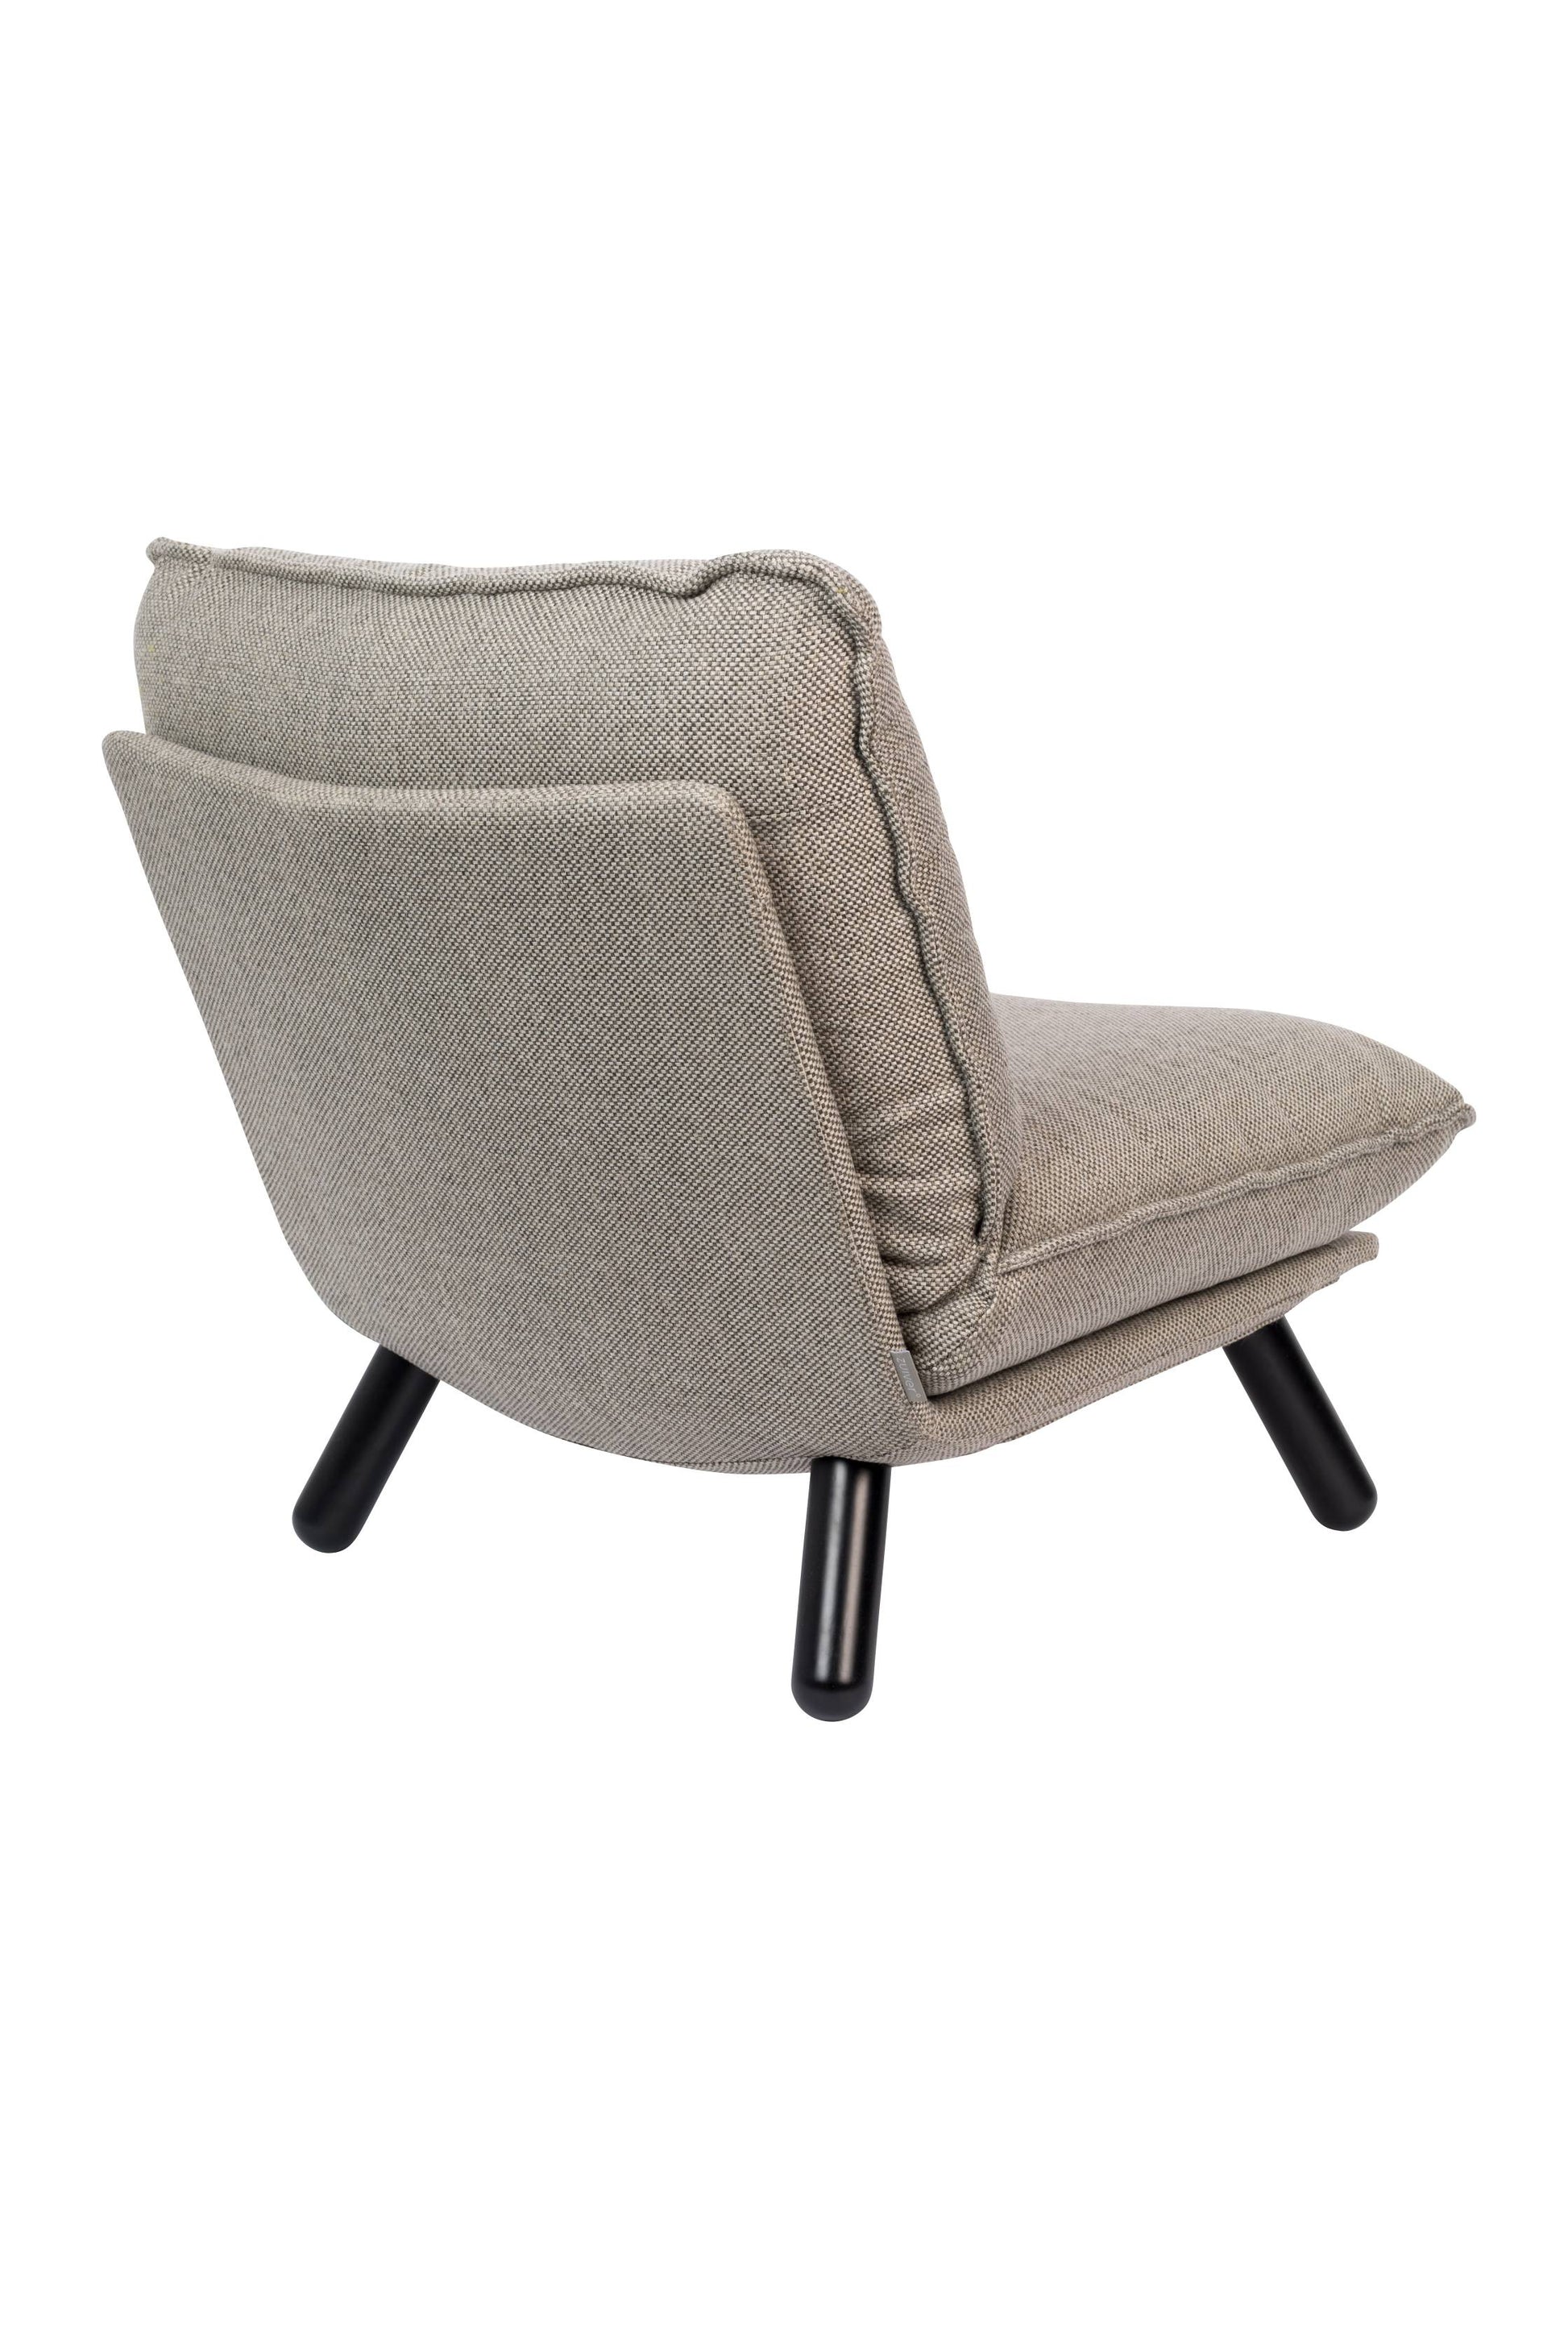 Zuiver | LOUNGE CHAIR LAZY SACK LIGHT GREY Default Title